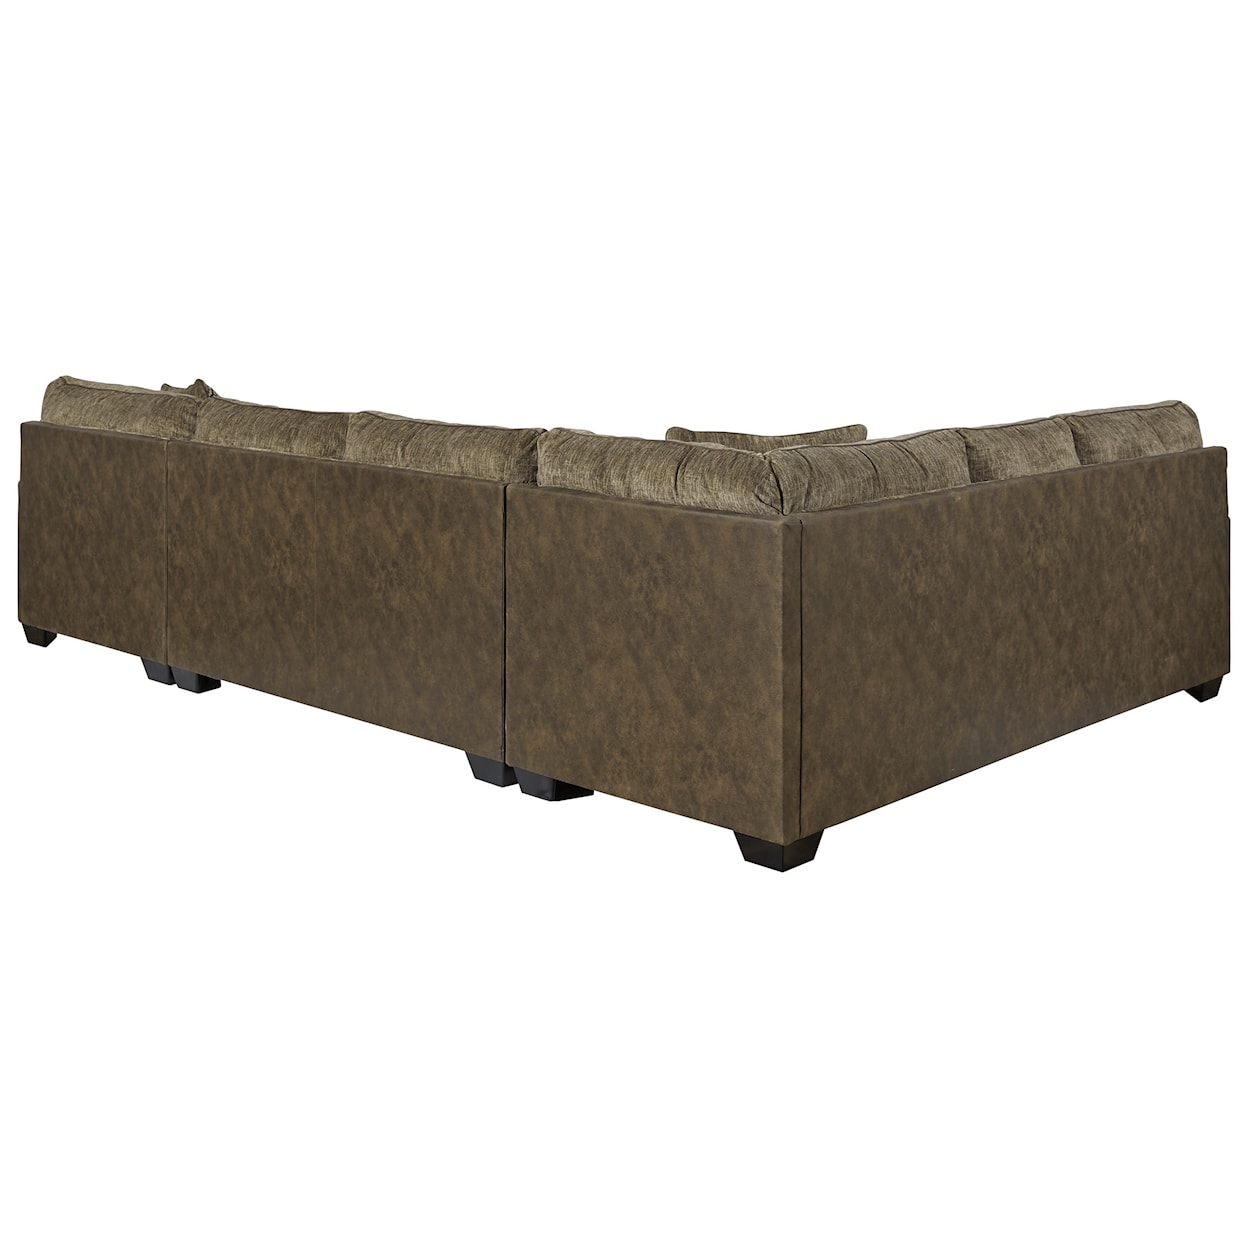 Benchcraft Abalone 3-Piece Sectional